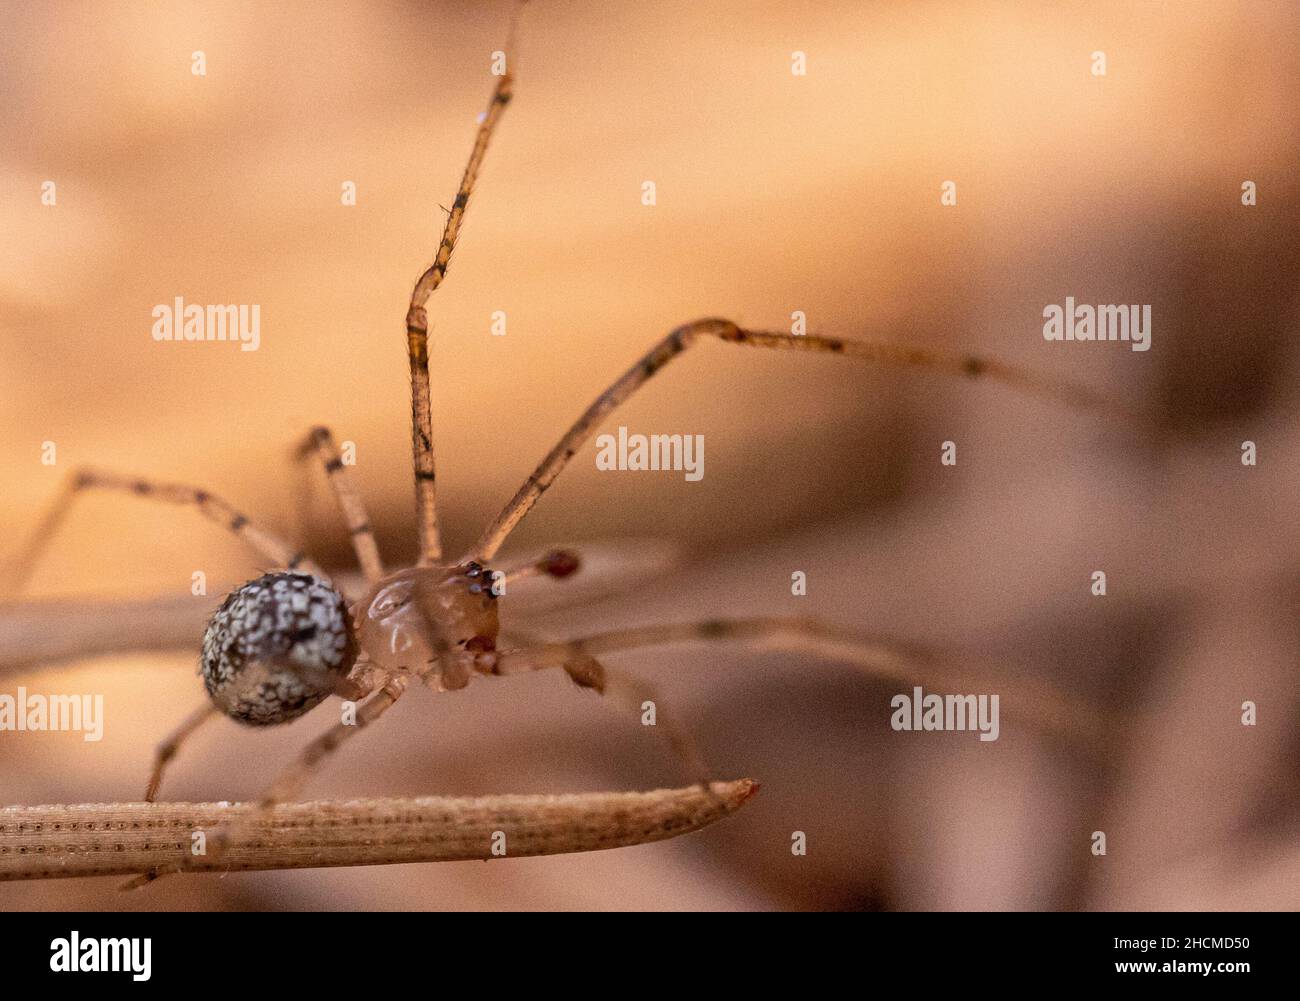 Selective focus shot of a haymaker spider Stock Photo